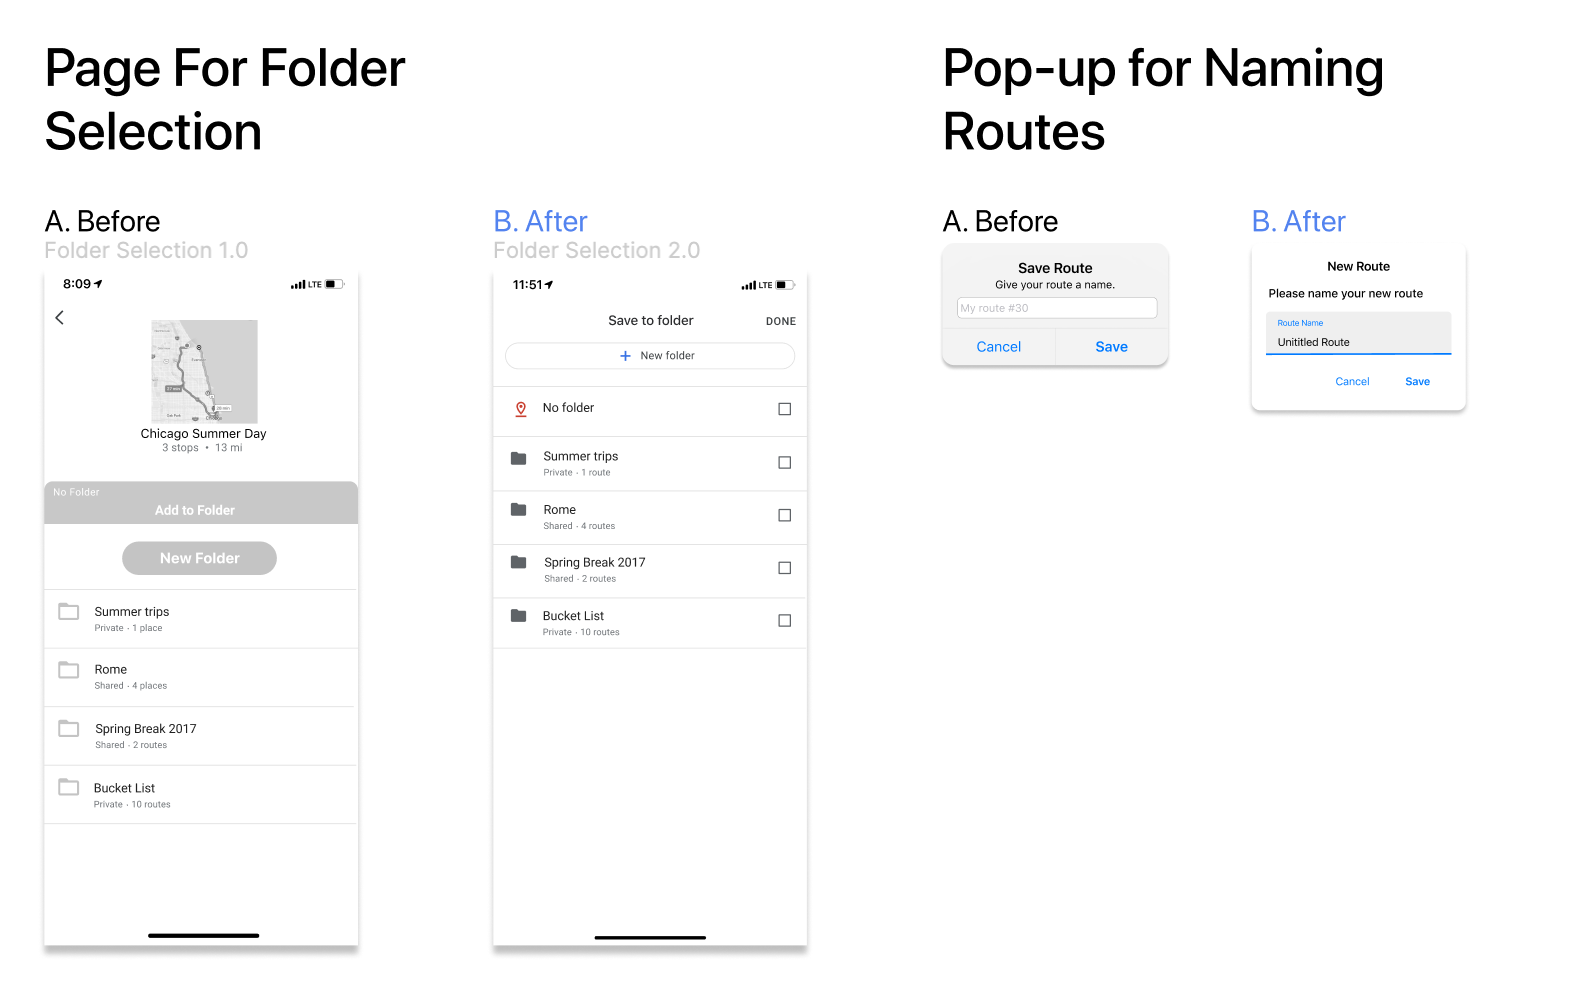 Comparison of 2 folder selection pages and 2 pop-ups for naming routes with focus on maintaining Google Maps visual design.